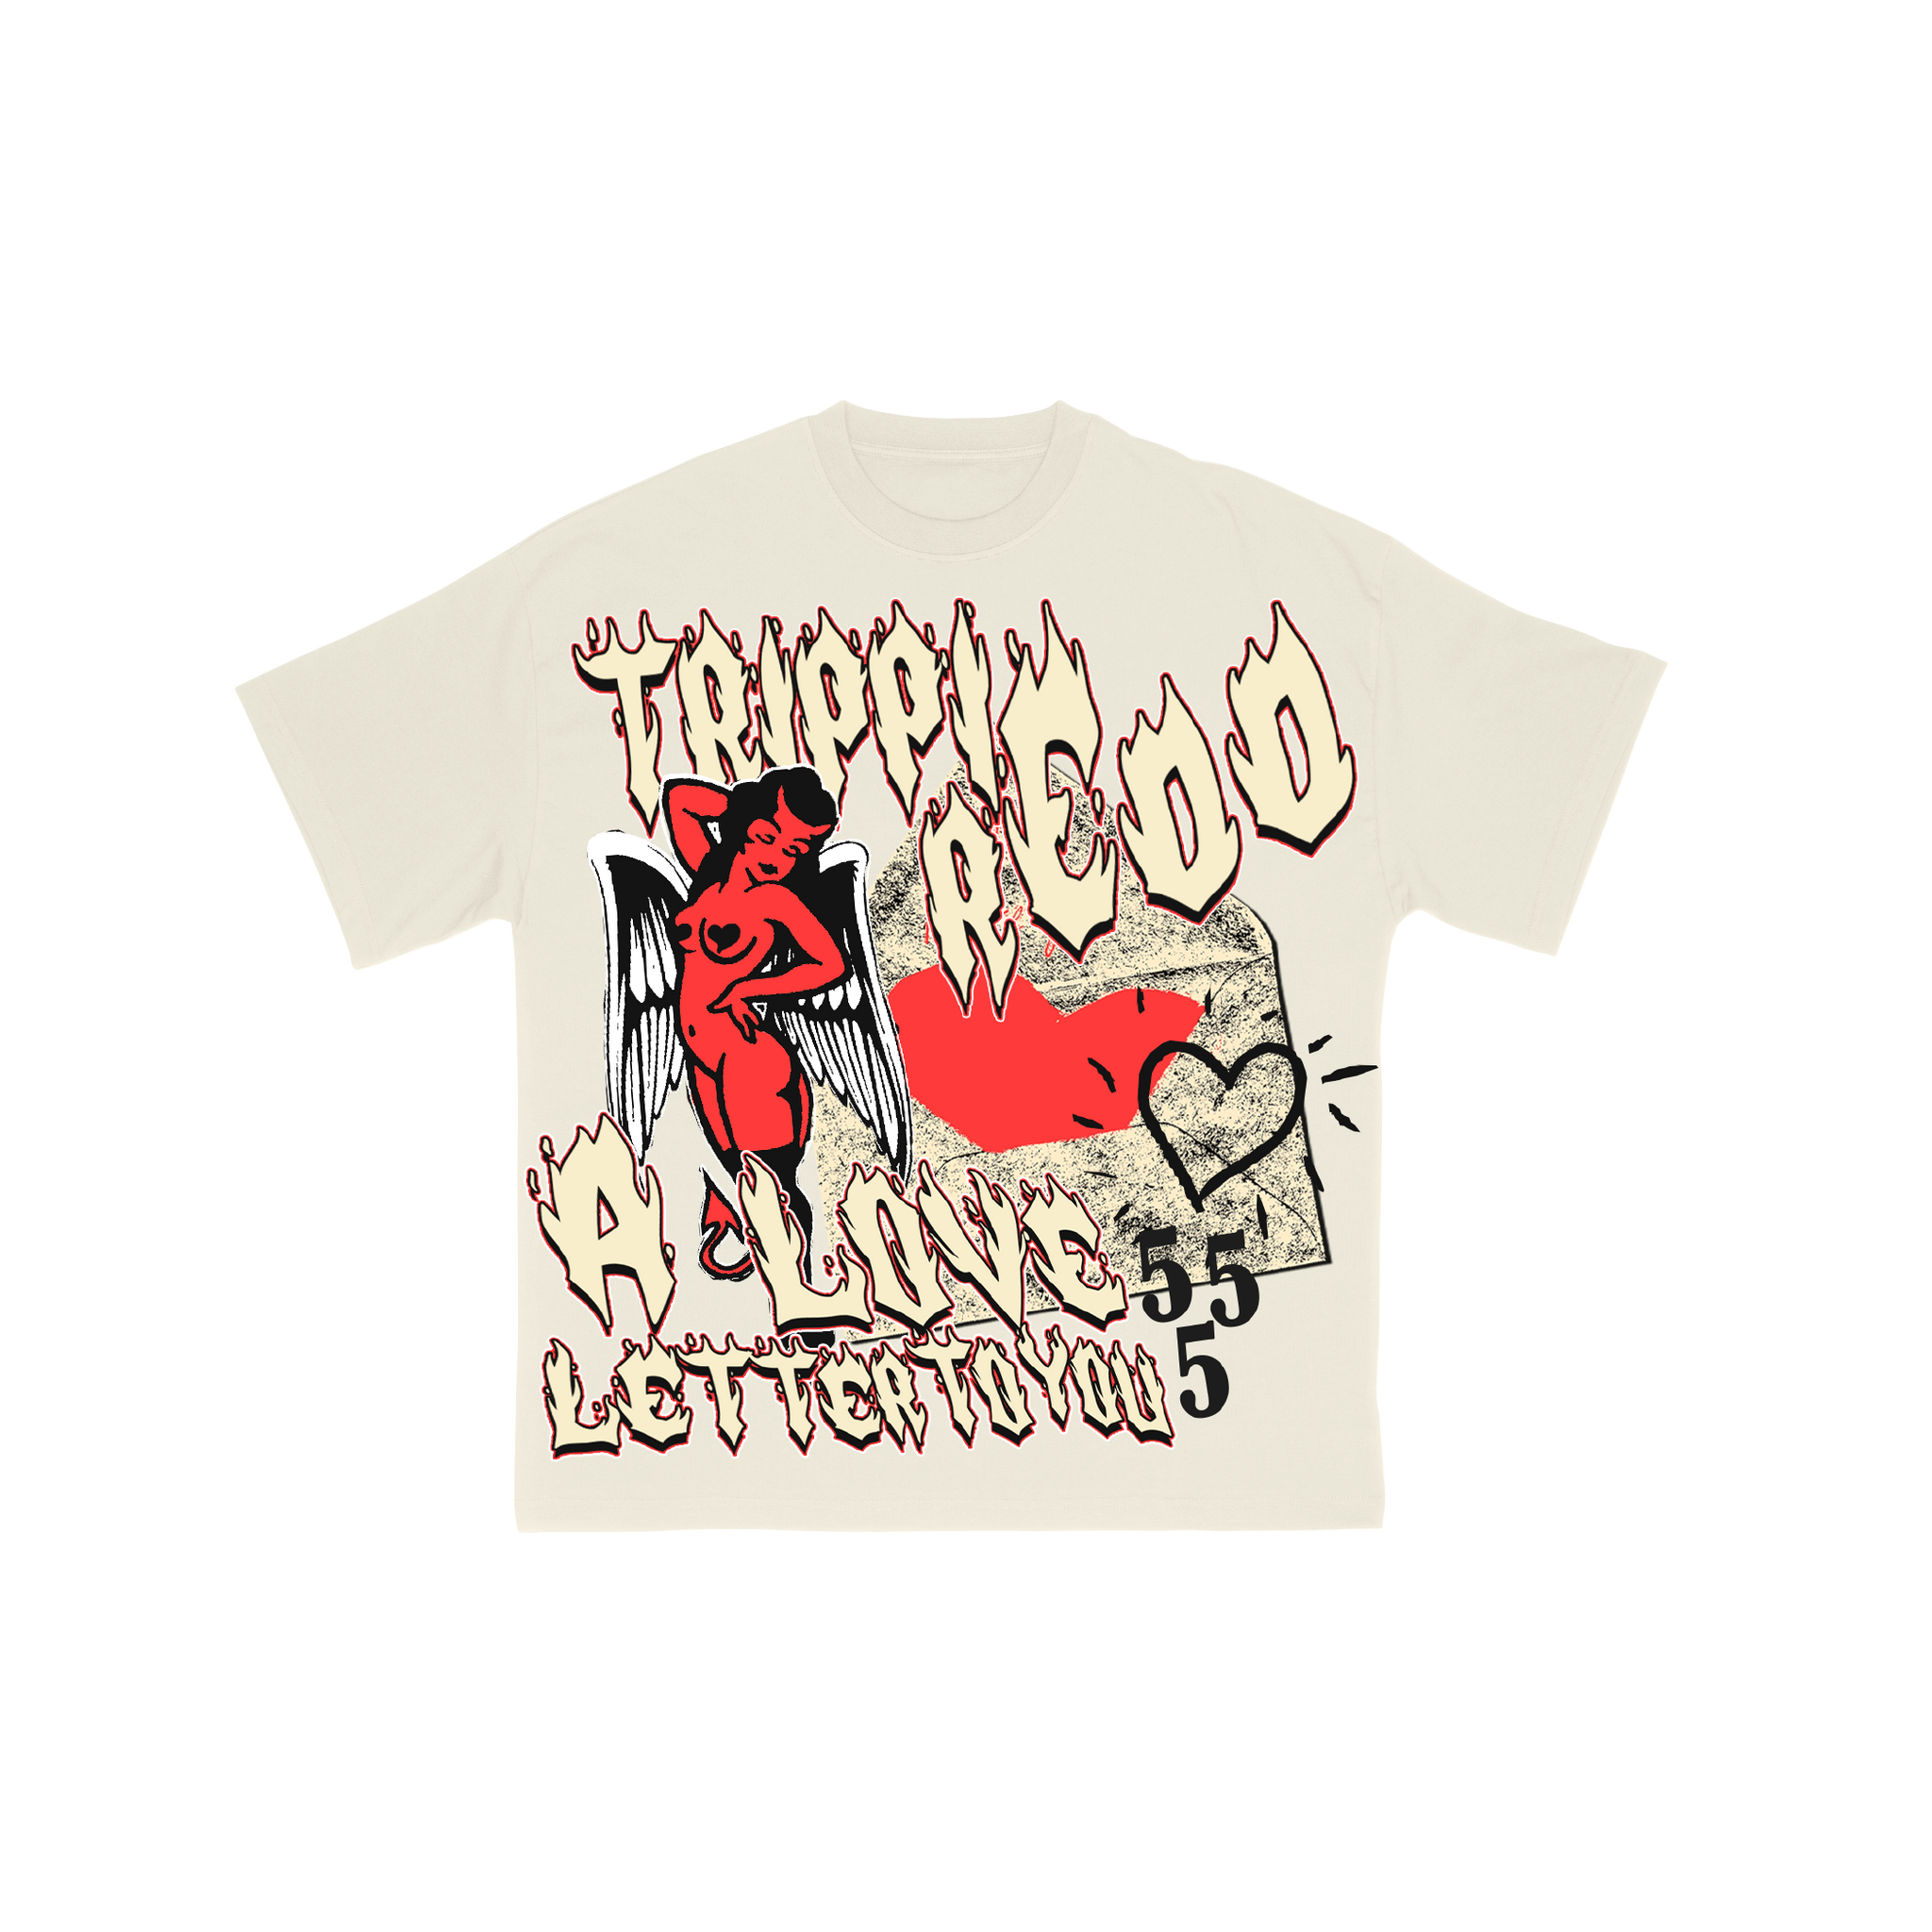 A LOVE LETTER X MST TEE WHITE